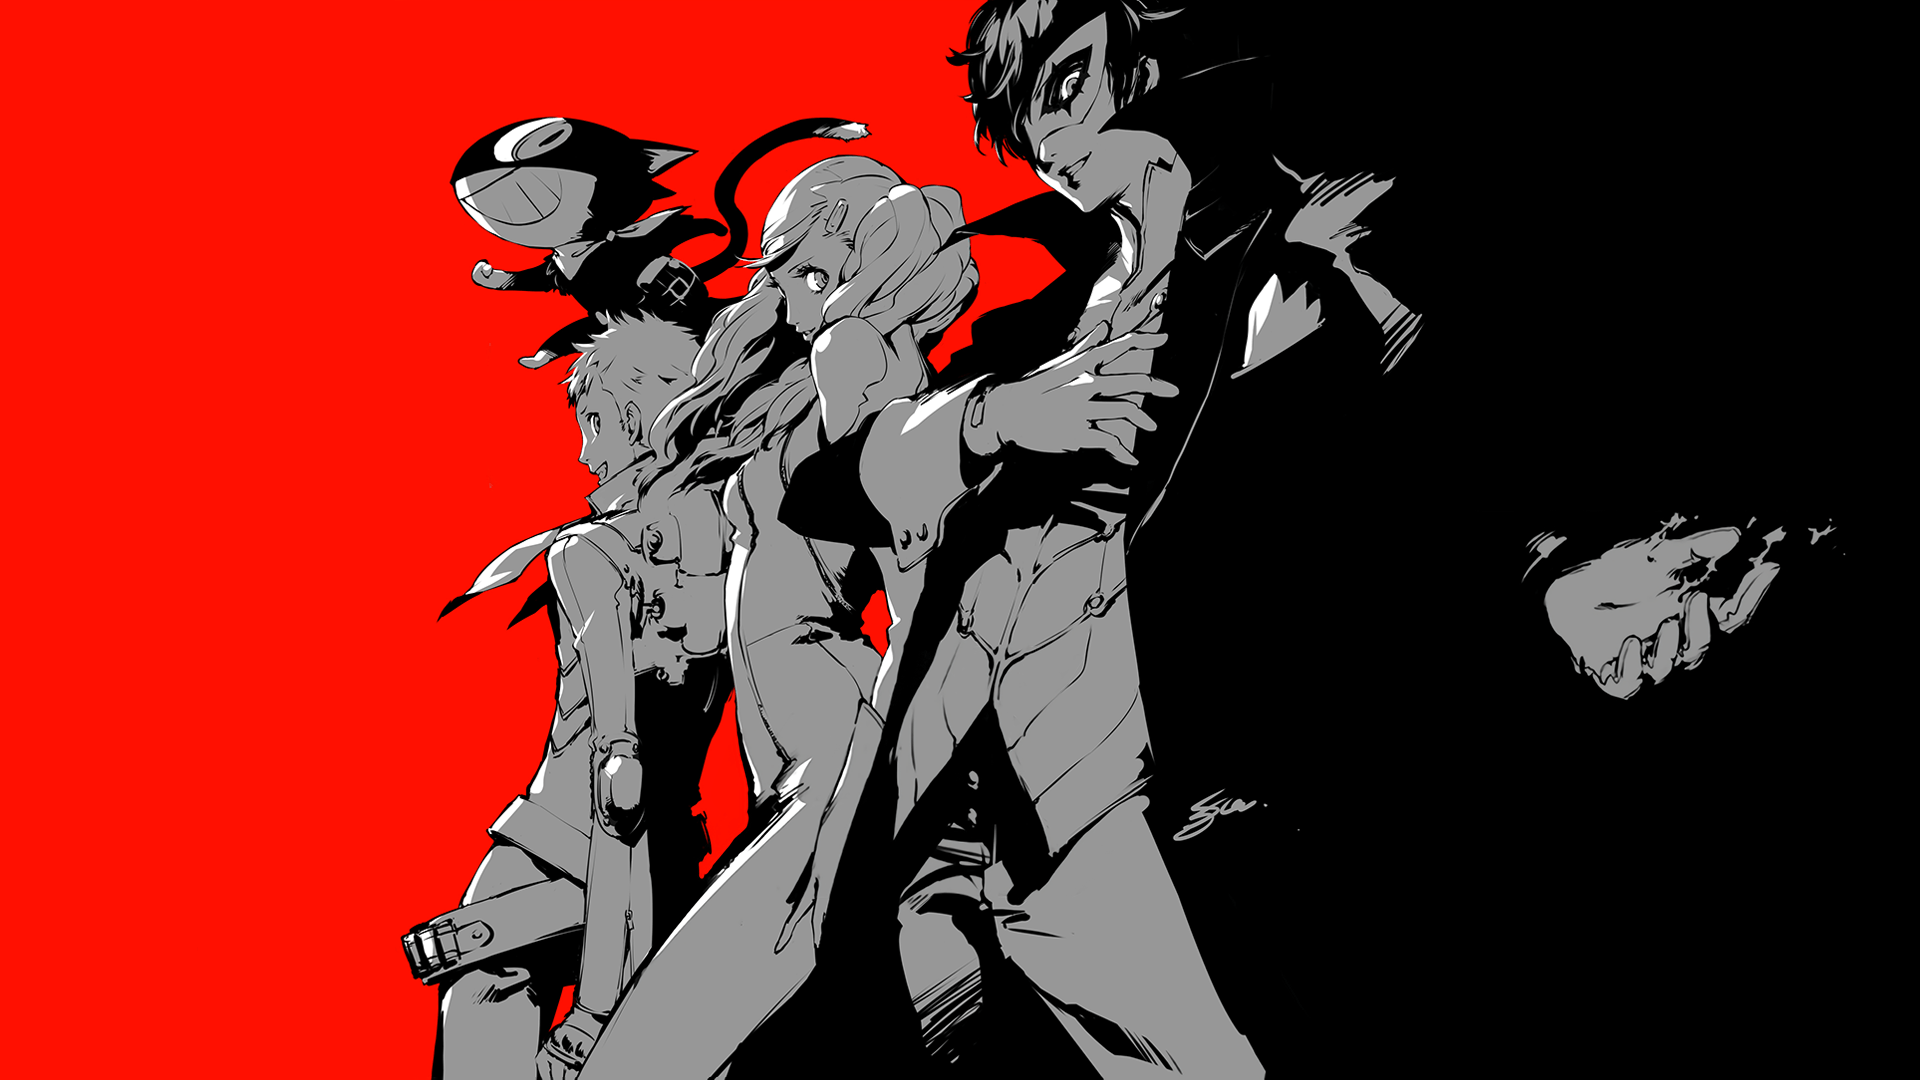 Persona 5 HD Wallpaper and Background Image